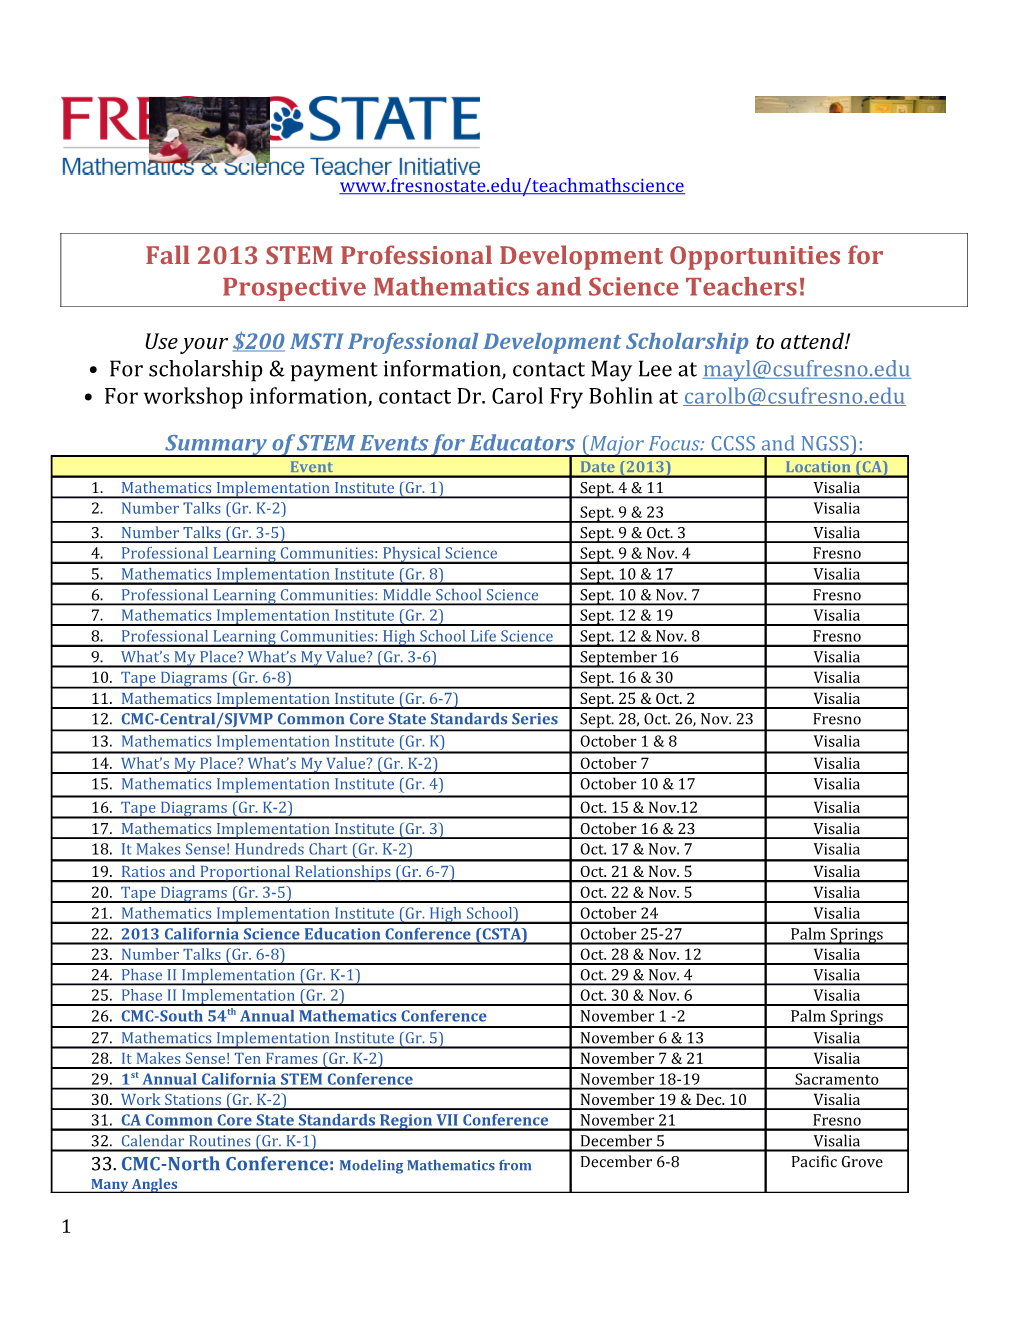 Fall 2013STEM Professional Development Opportunities for Prospective Mathematics and Science